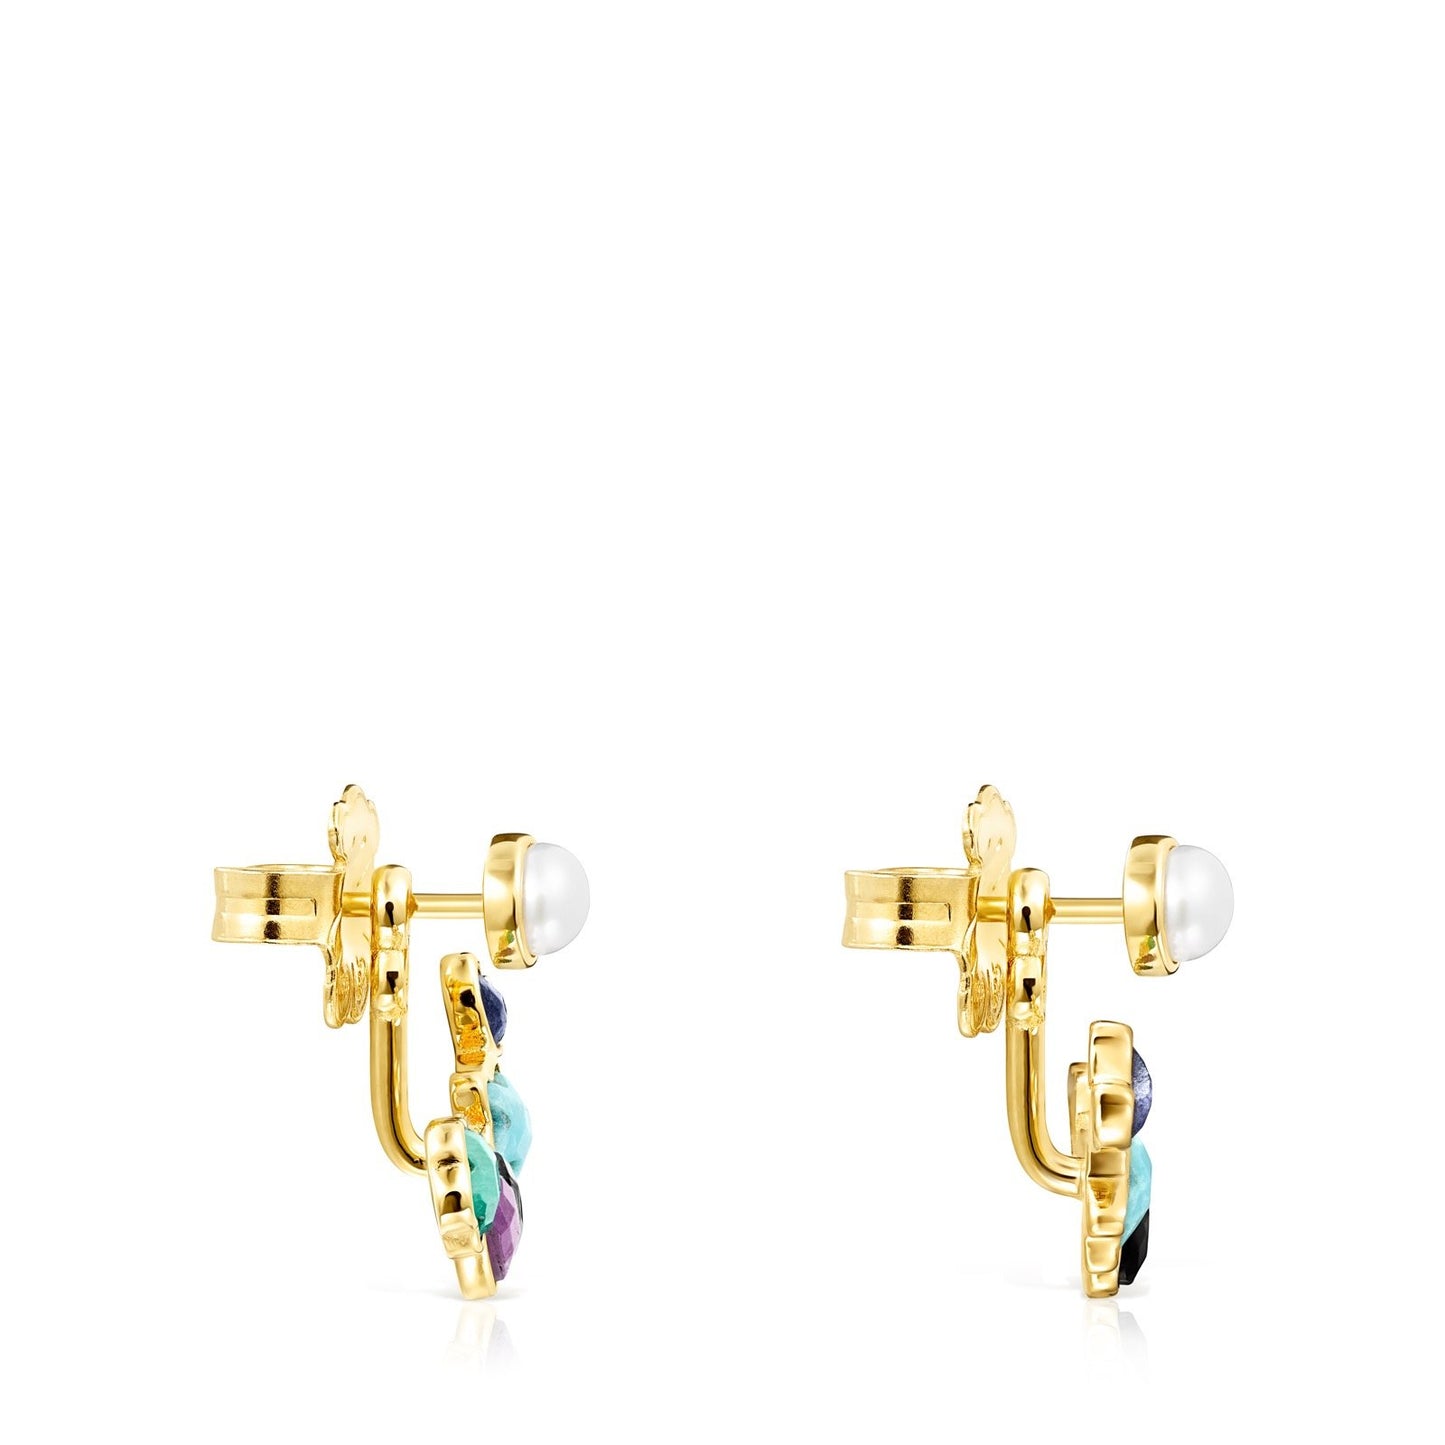 Tous Short Glory Earrings in Gold Vermeil with Gemstones 918593590